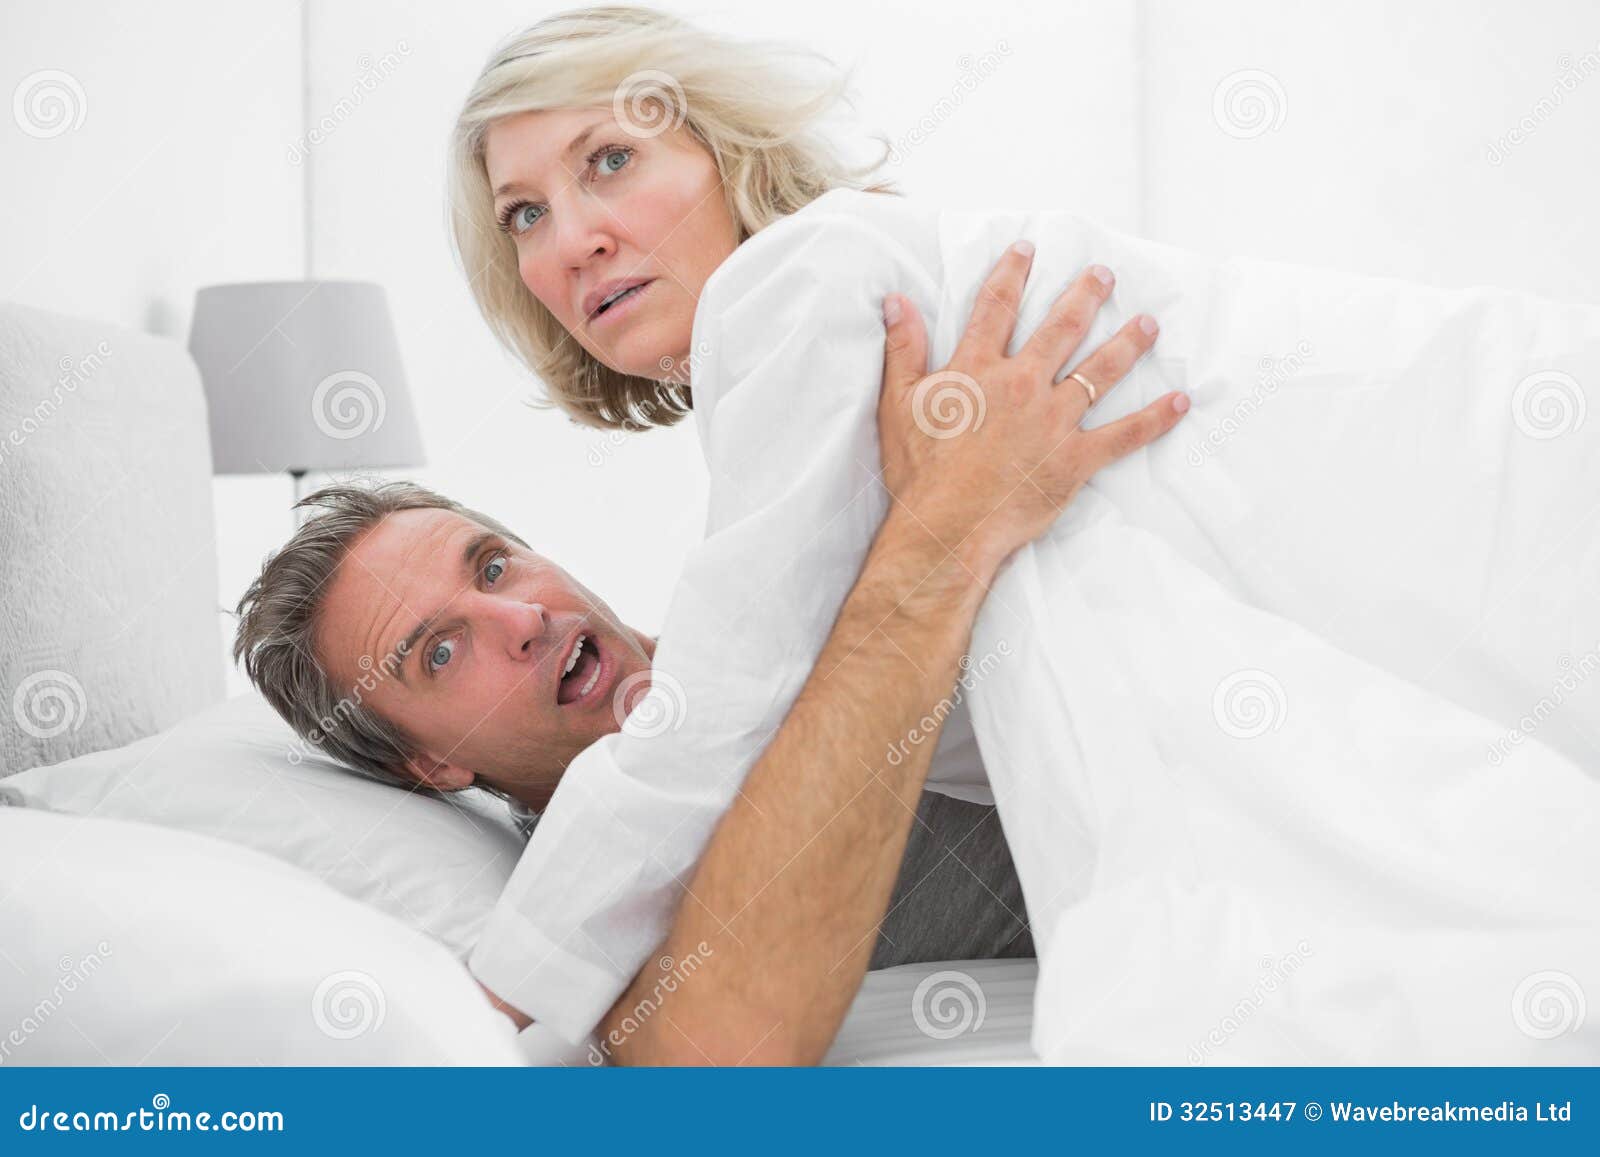 Shocked Couple Caught In The Act Stock Image Image Of Caucasian